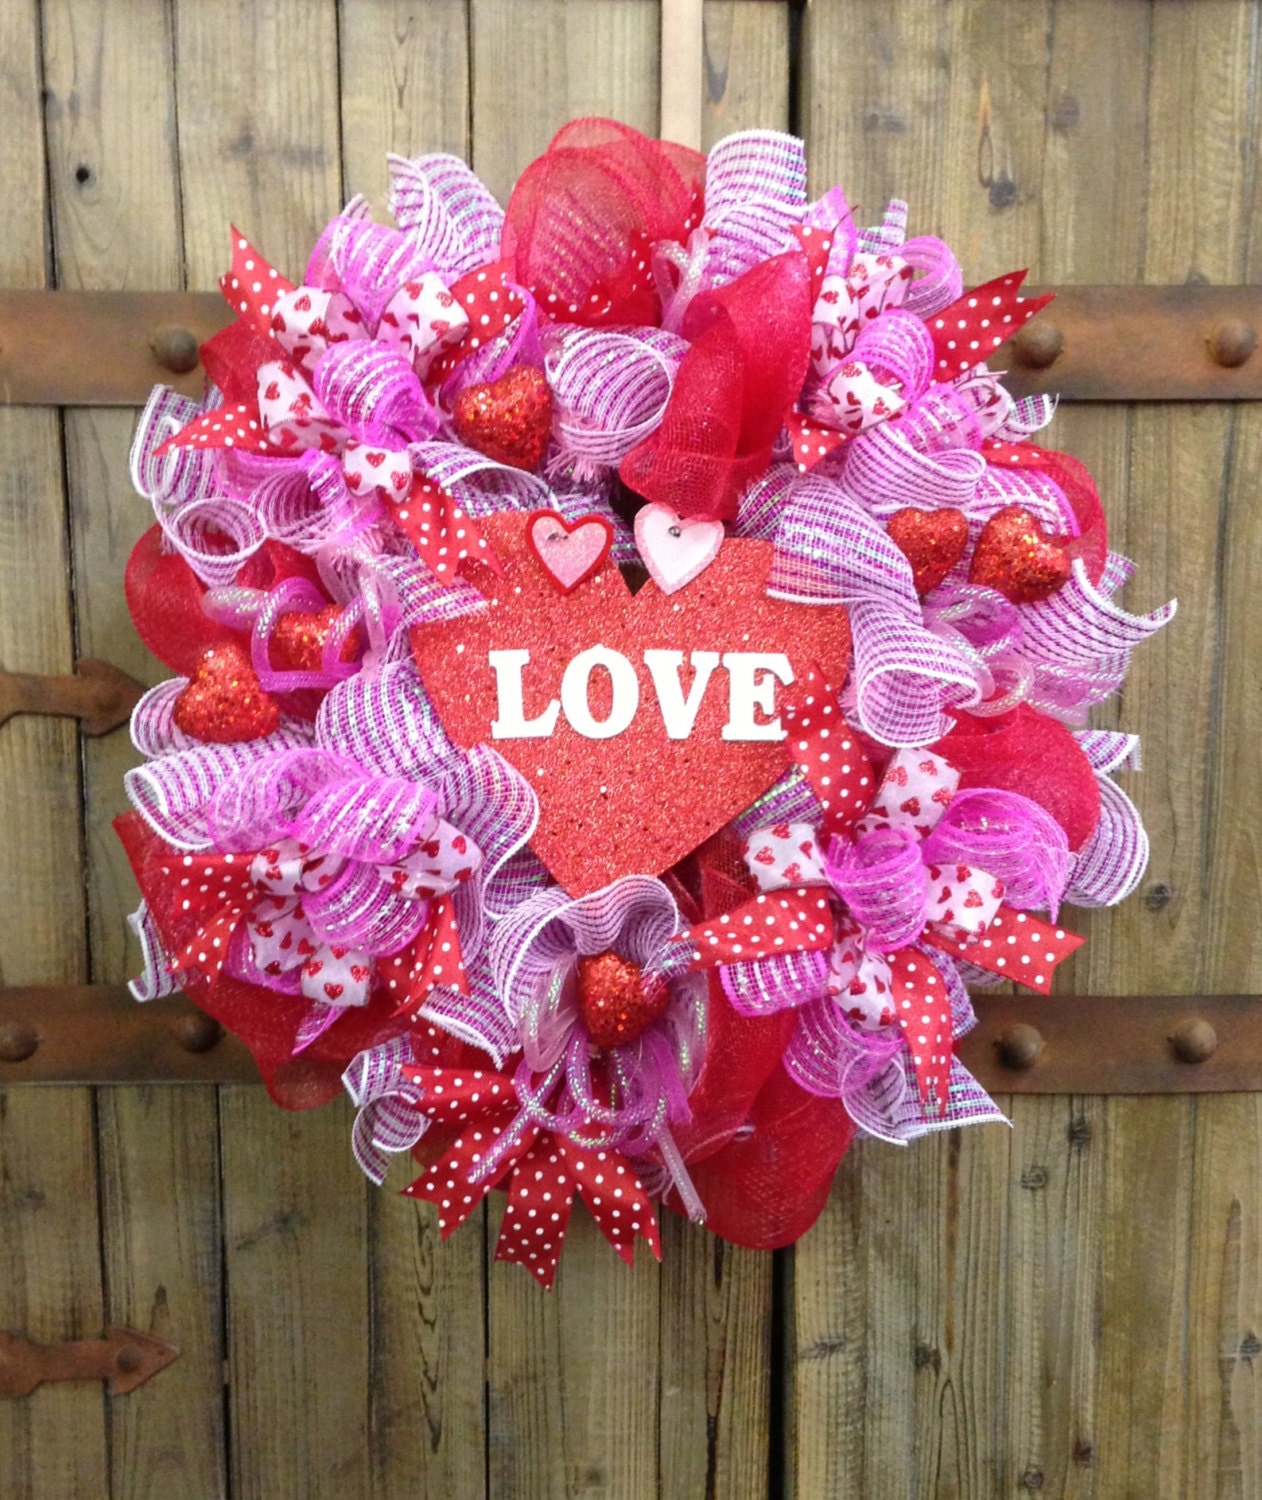 Minimalist Valentines Day Wreath for Small Space